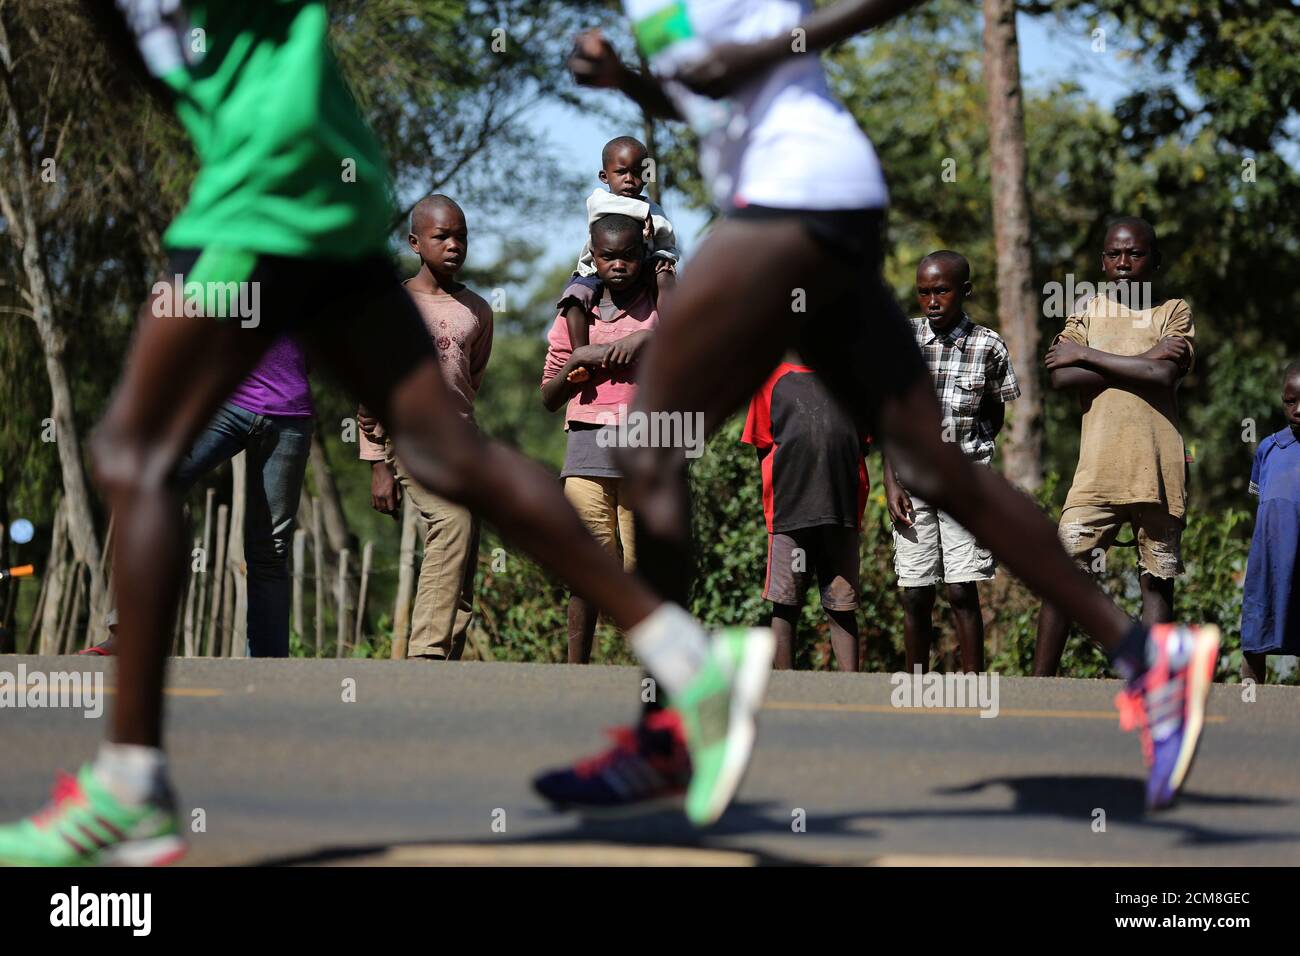 Athletes run on a road during a half marathon near the town of Eldoret in  western Kenya, March 20, 2016. In Kenya's western town of Iten, known as  the "Home of Champions"